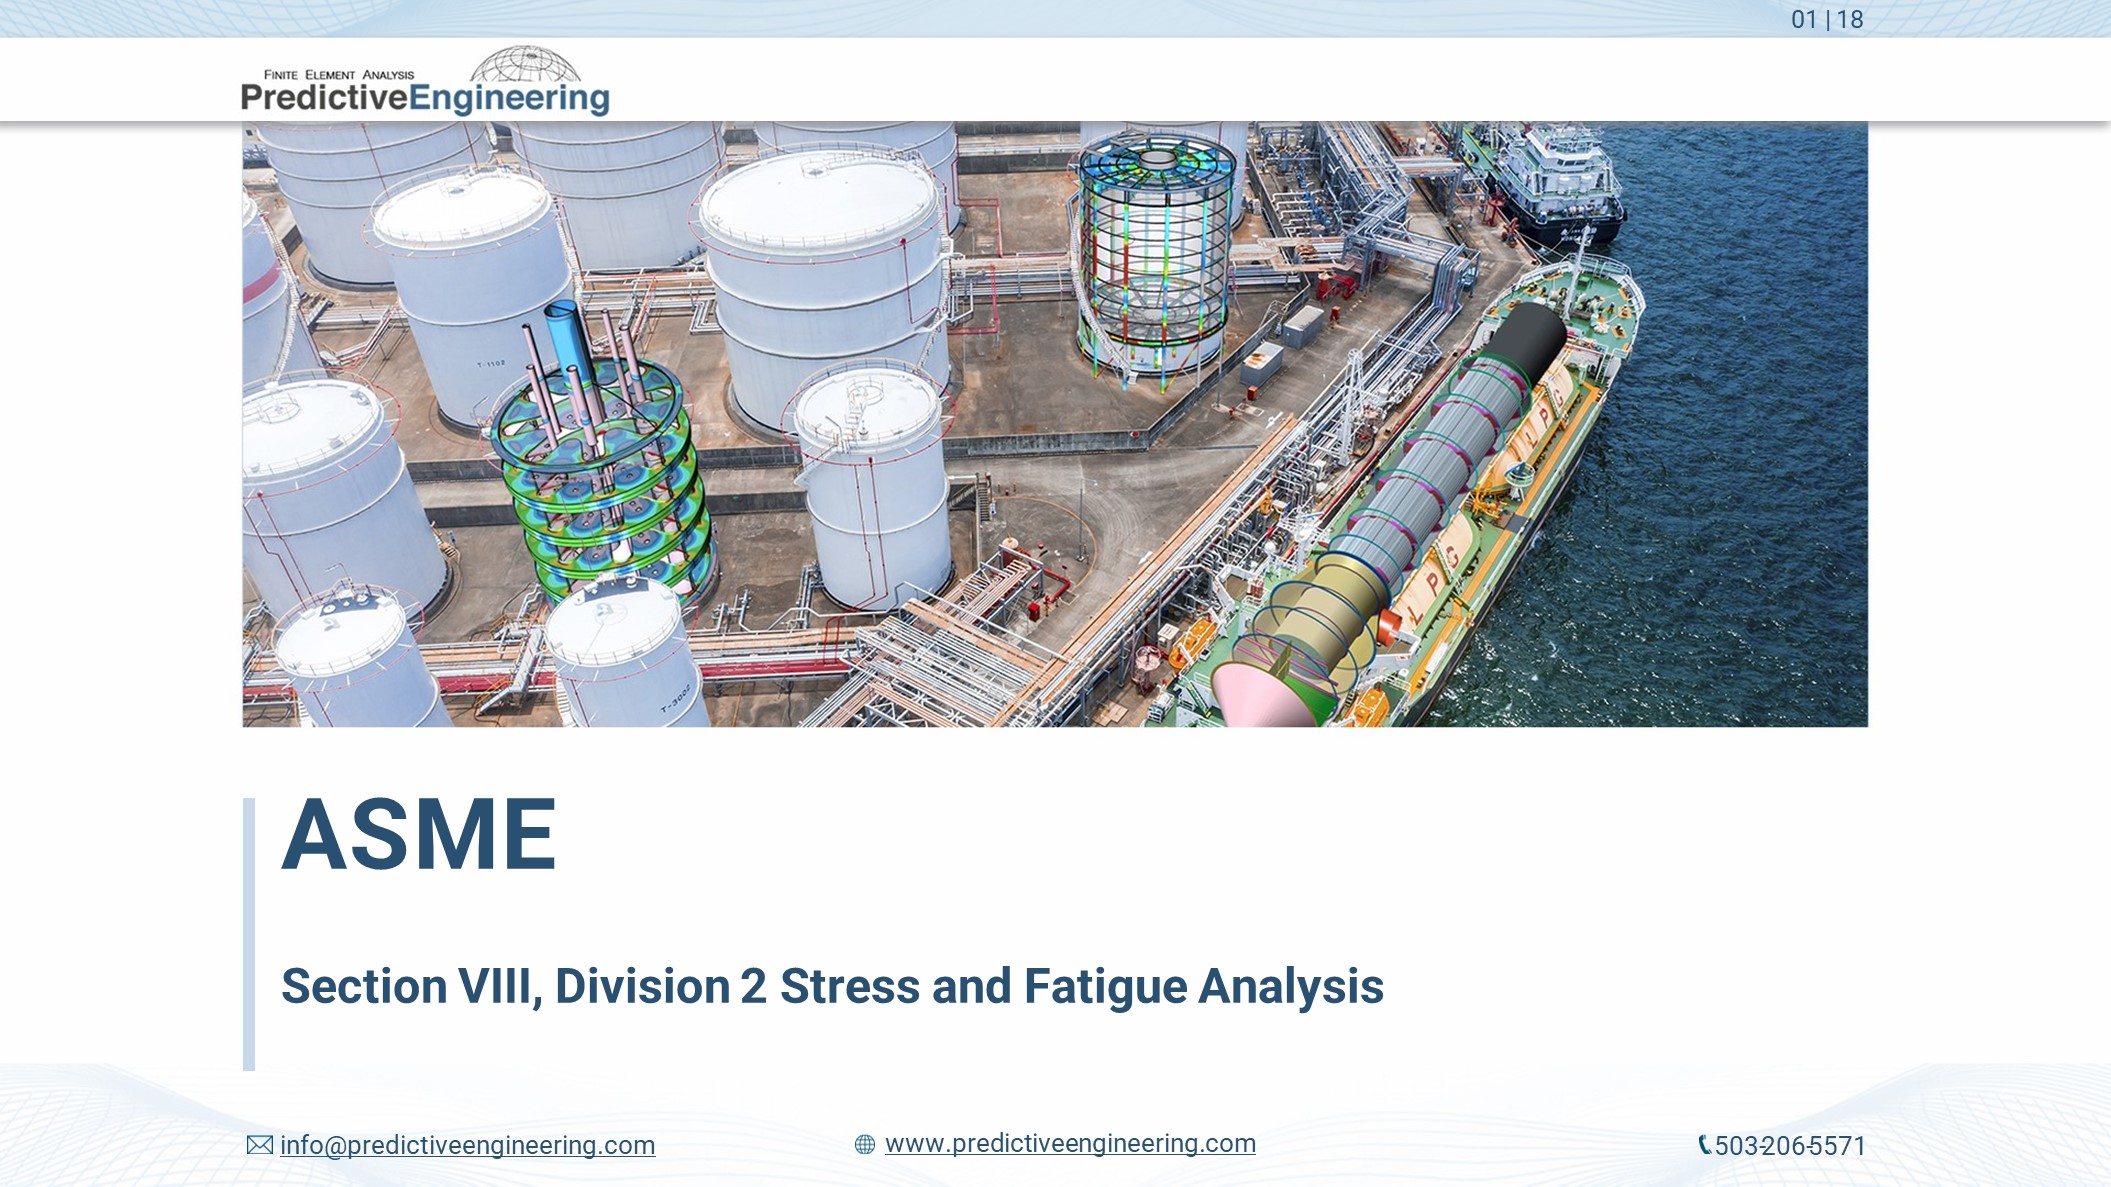 Pressure Vessel Consulting - Fatigue Analysis Services